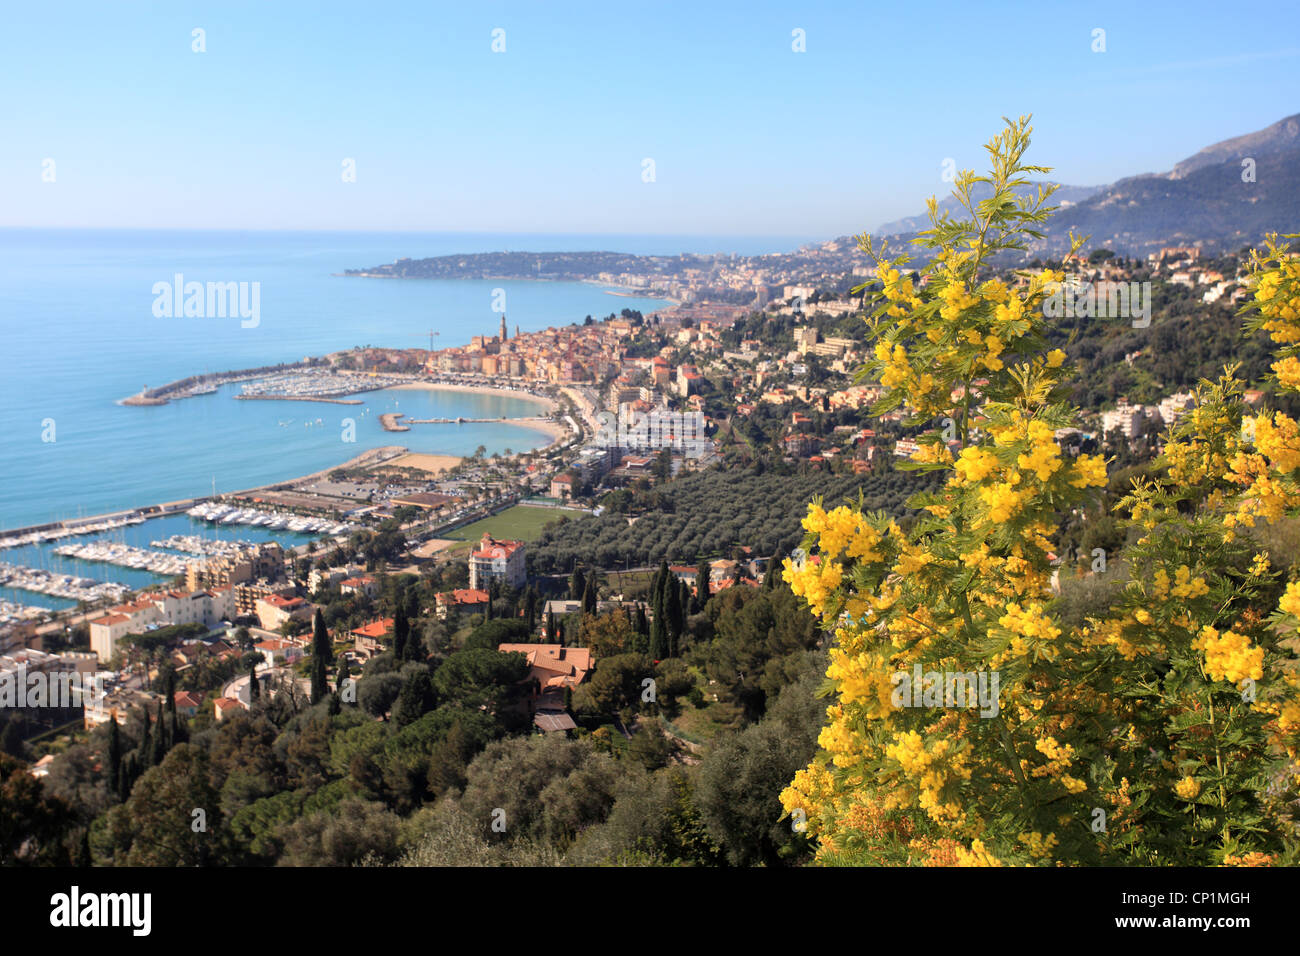 Overview of the coastal city of Menton on the French Riviera with the flowered Mimosa Stock Photo